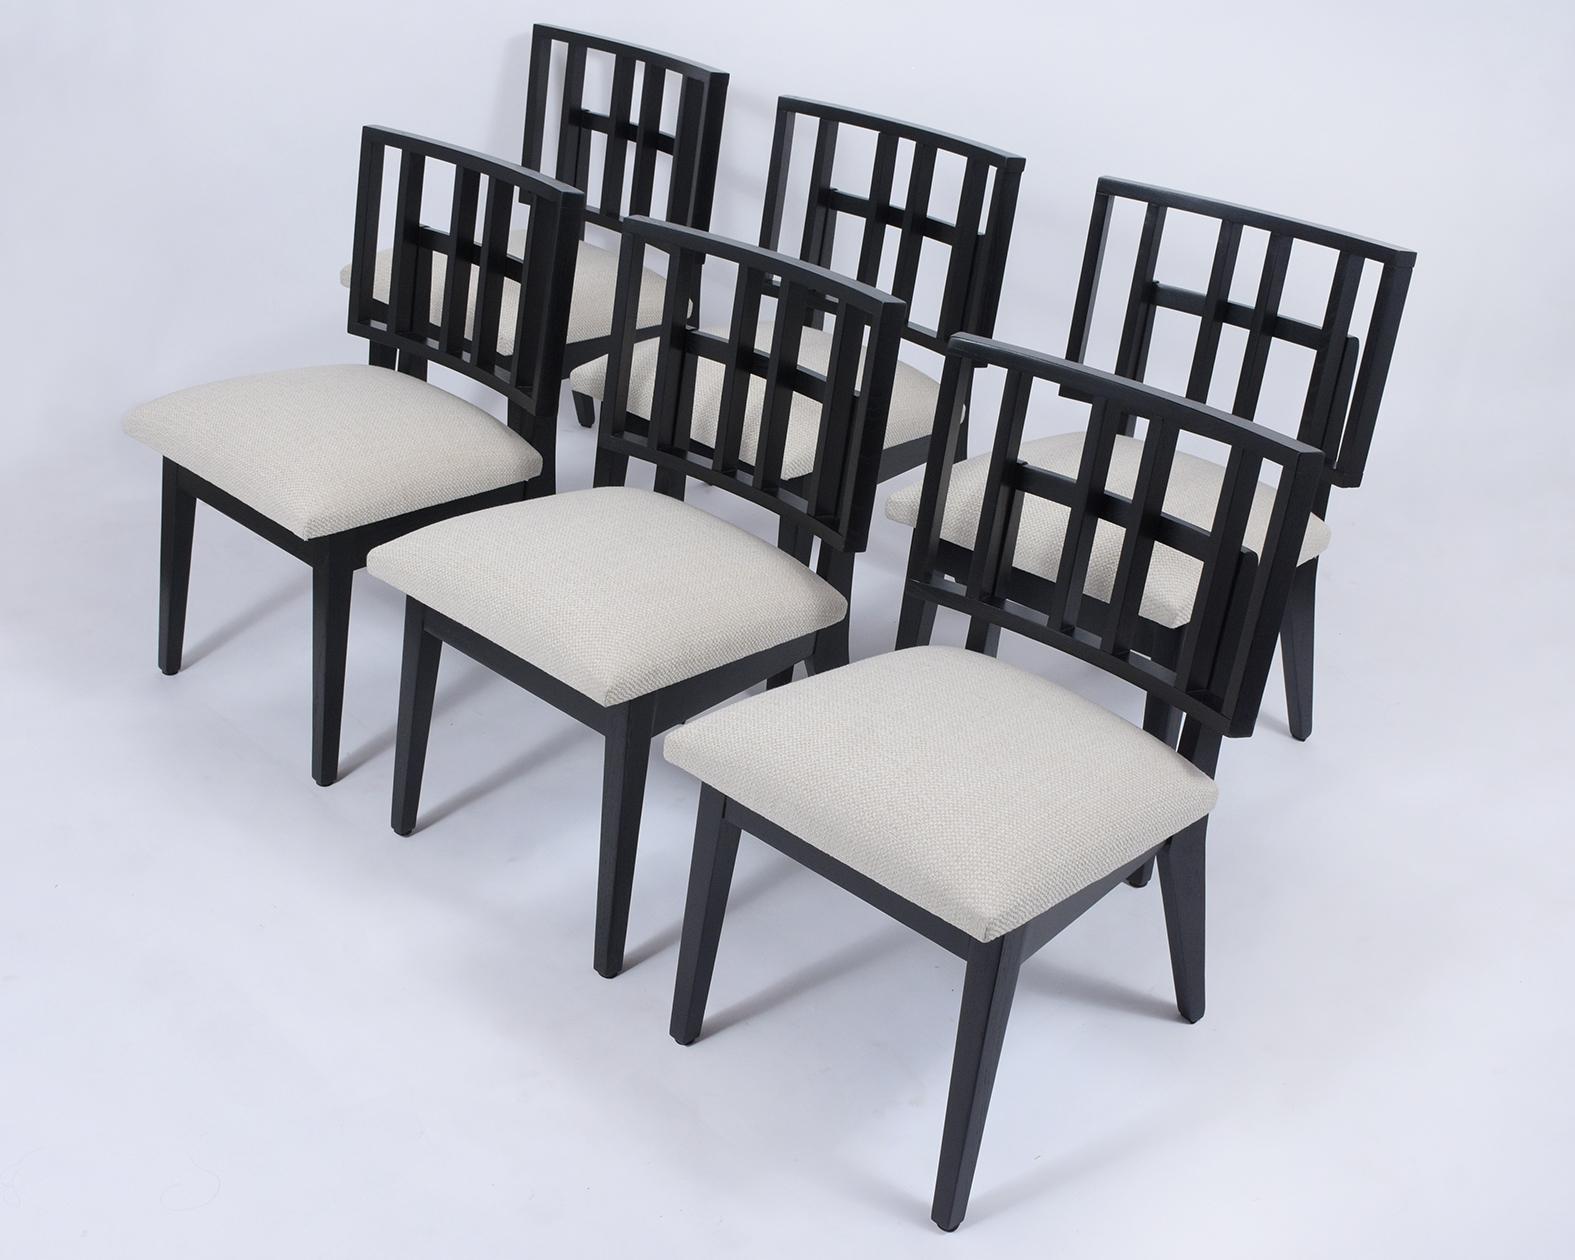 American Set of Six Mid-Century Modern Dining Chairs